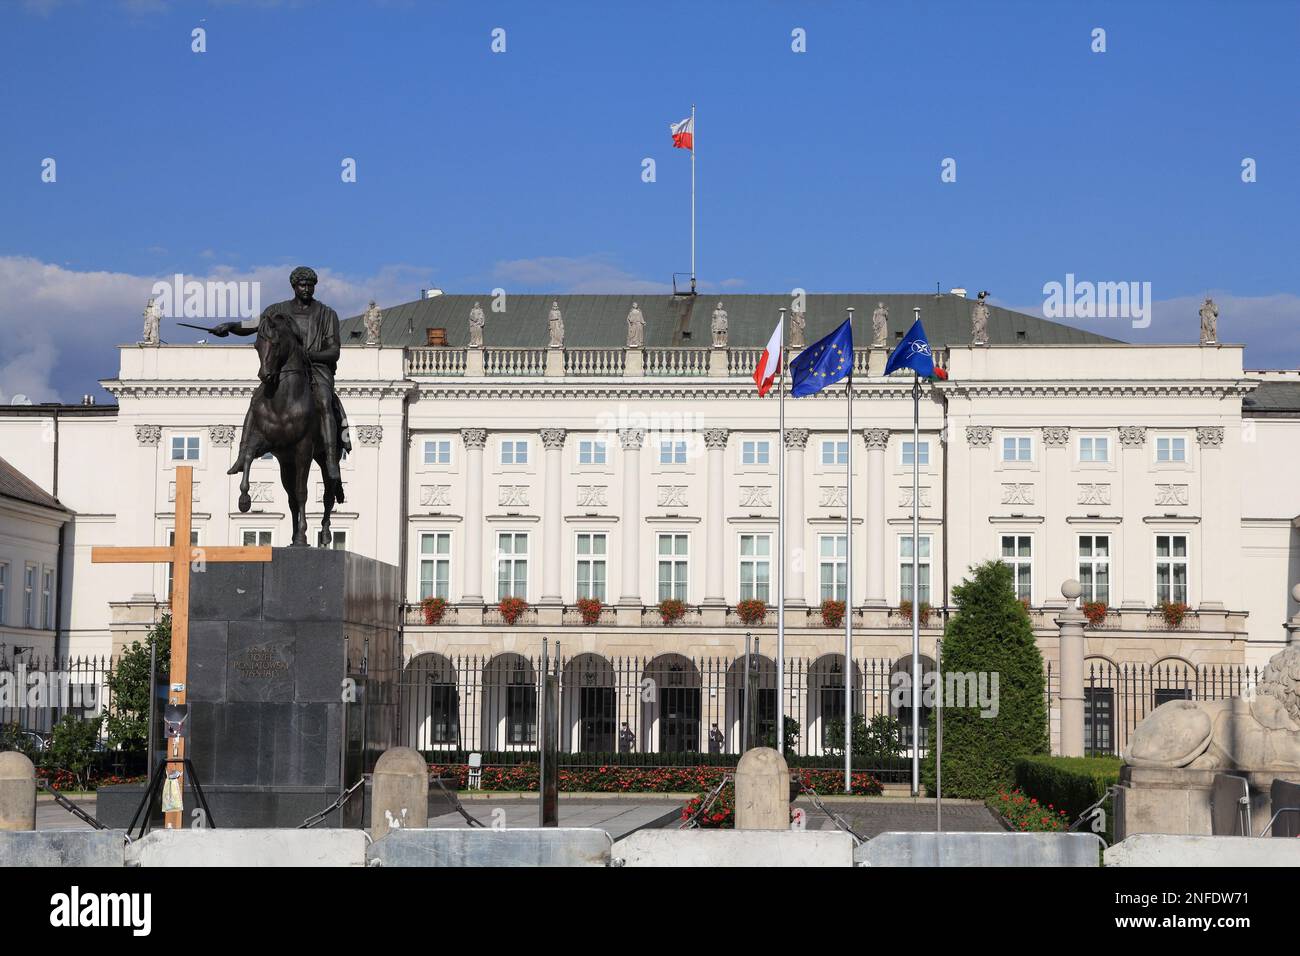 WARSAW, POLAND - SEPTEMBER 8, 2010: Presidential Palace in Warsaw. It is the official residence of head of state and president of Poland. Stock Photo